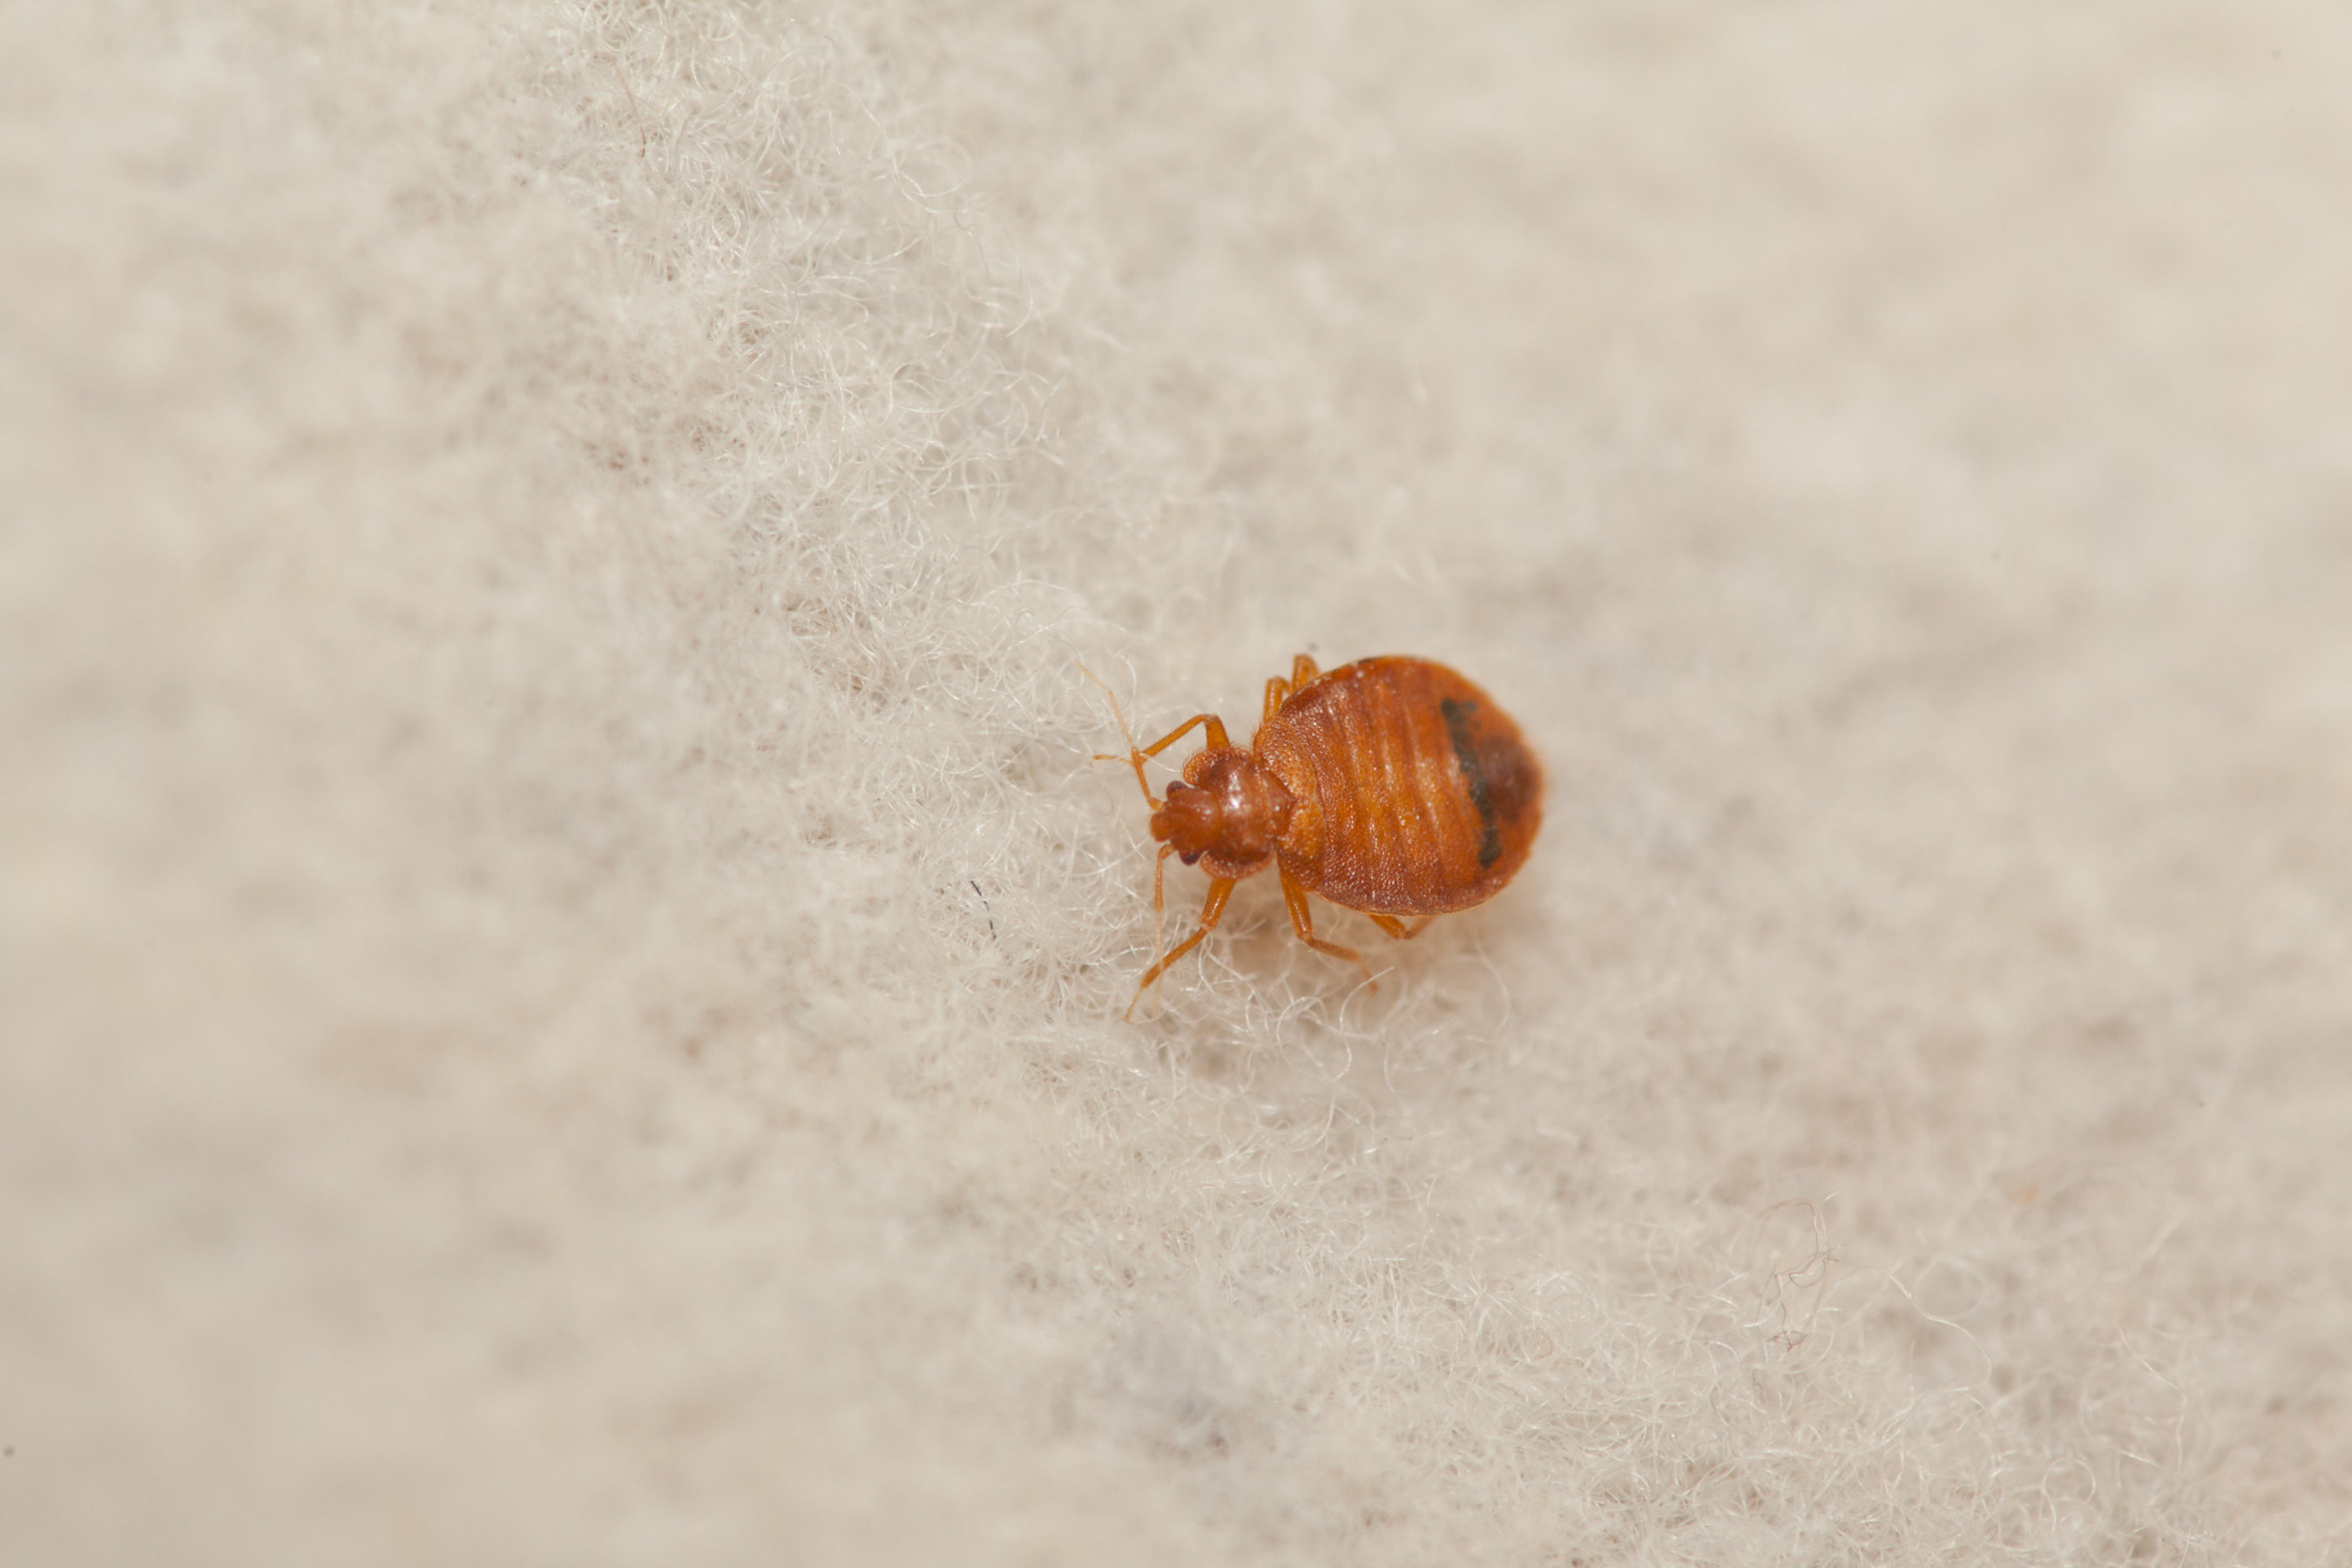 Chicago tops Orkin's bed bug cities list for the 3rd year in a row. Orkin experts say bed bugs are a serious issue across the country. Rollins, Orkin's parent company, reports an 18% increase in bed bug revenue in 2014.